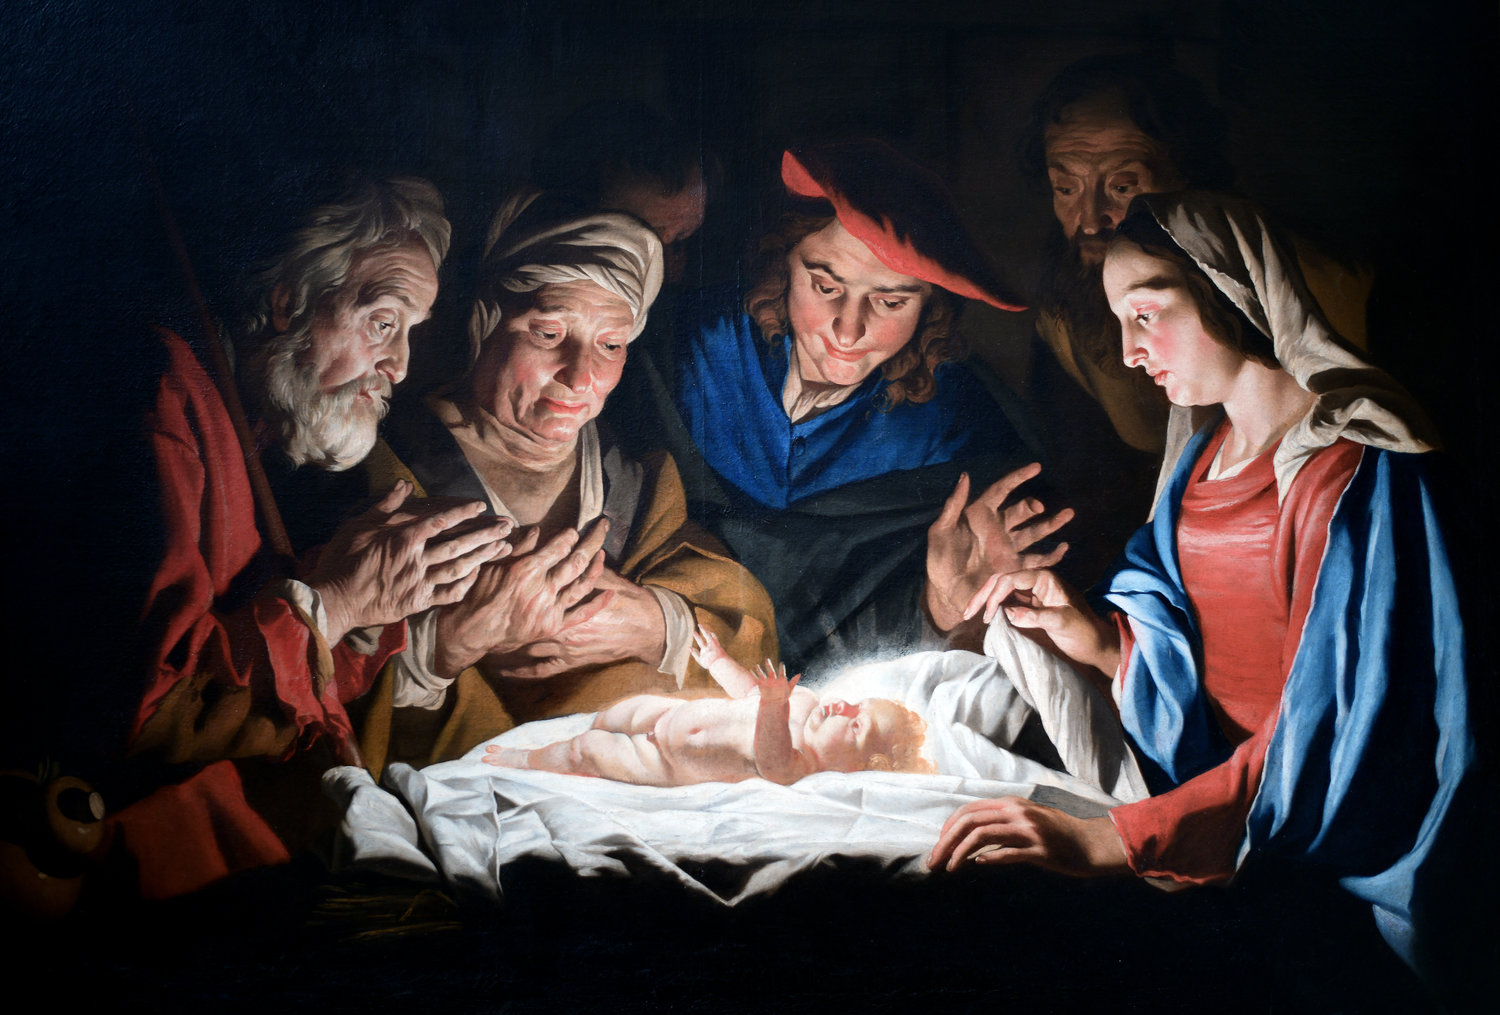 "The Adoration of the Shepherds" by Dutch painter Matthias Stomer, 1632